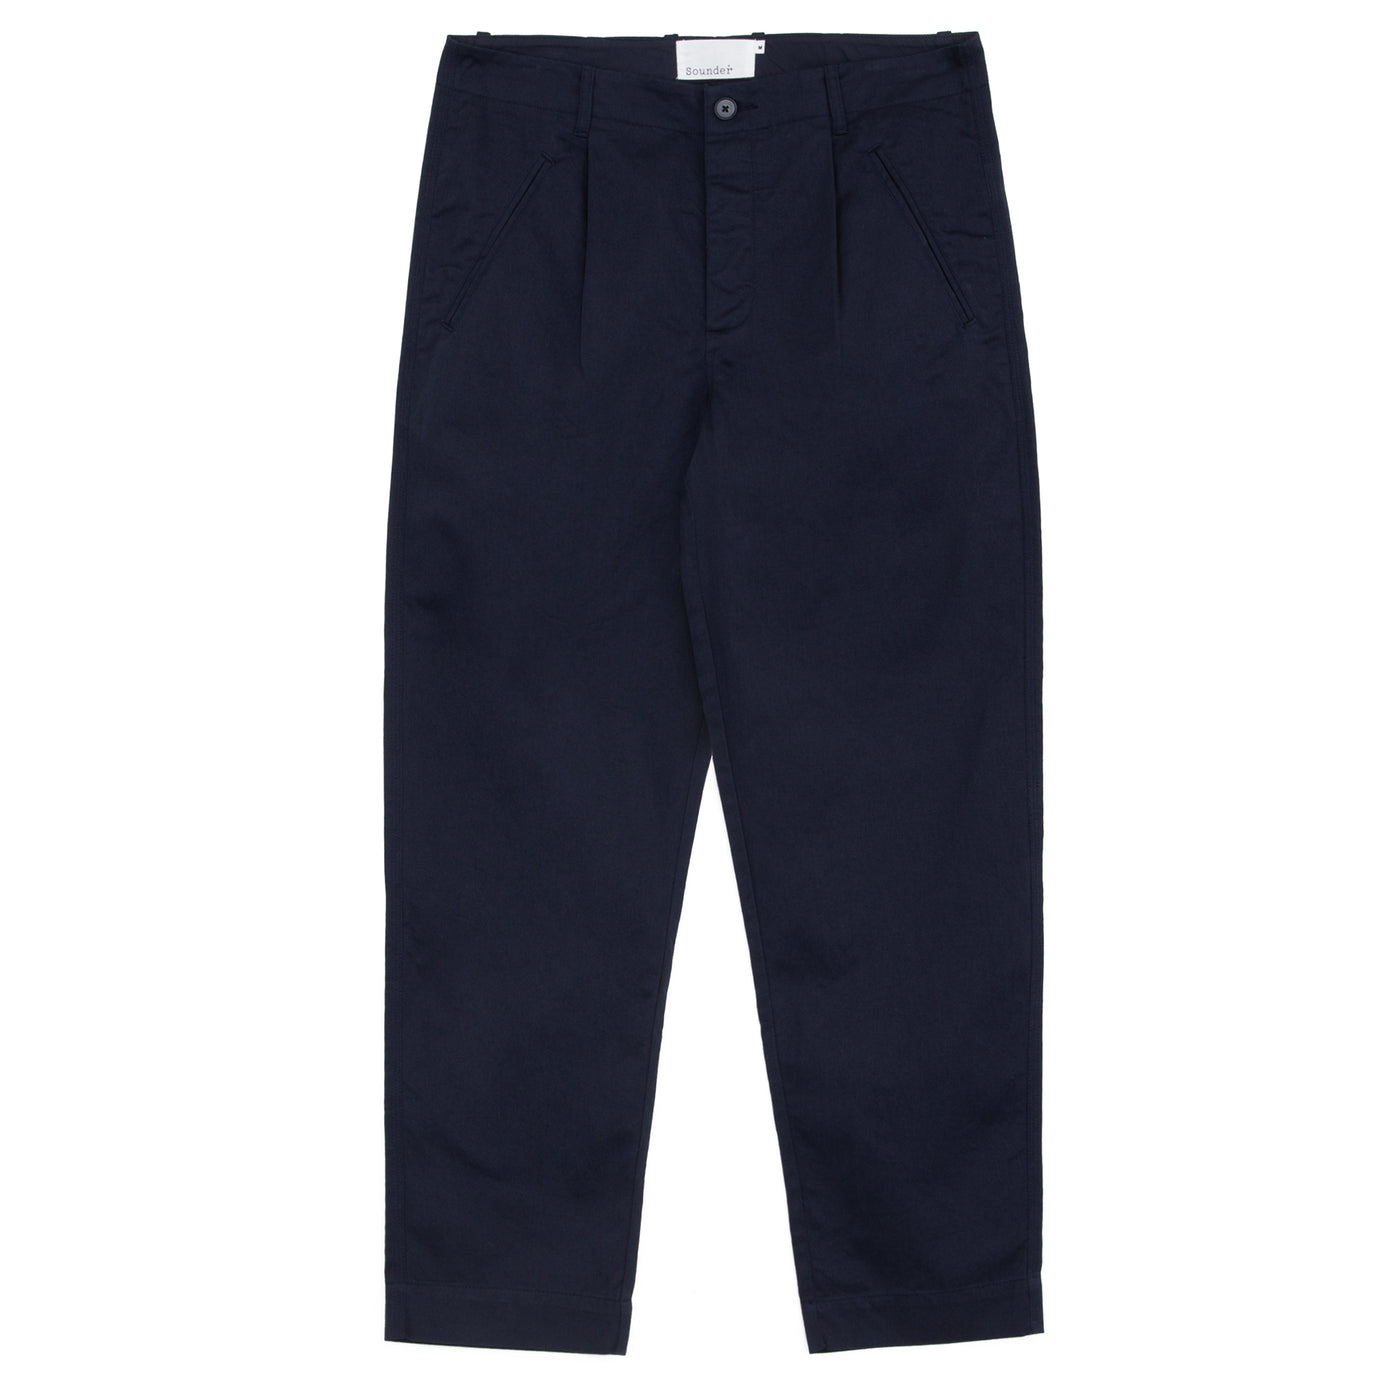 Good Walk Chino - Navy Cotton Twill with Navy Star Embroidery